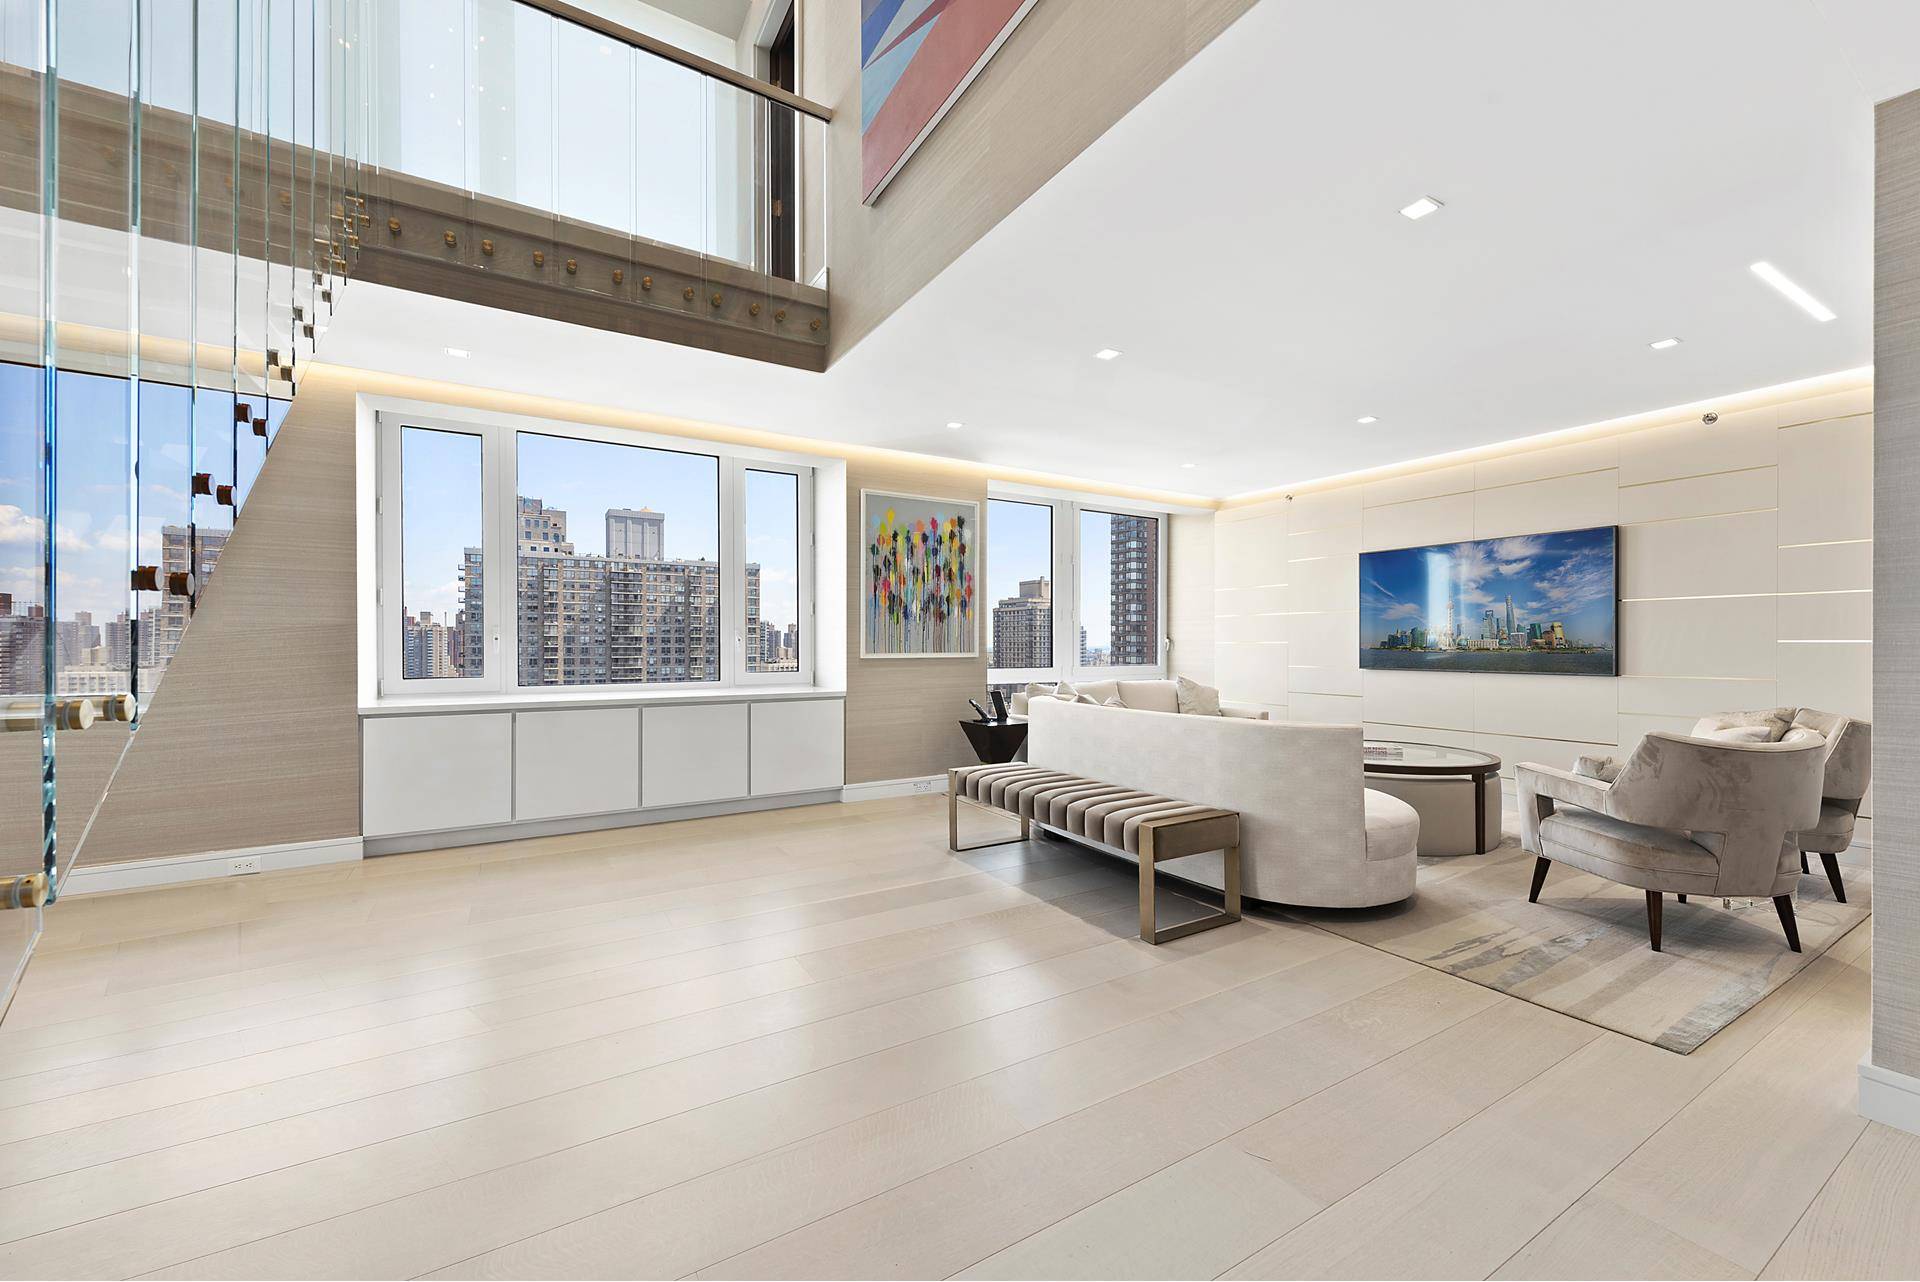 No expense has been spared in the meticulous gut renovation of this stunning duplex condominium.